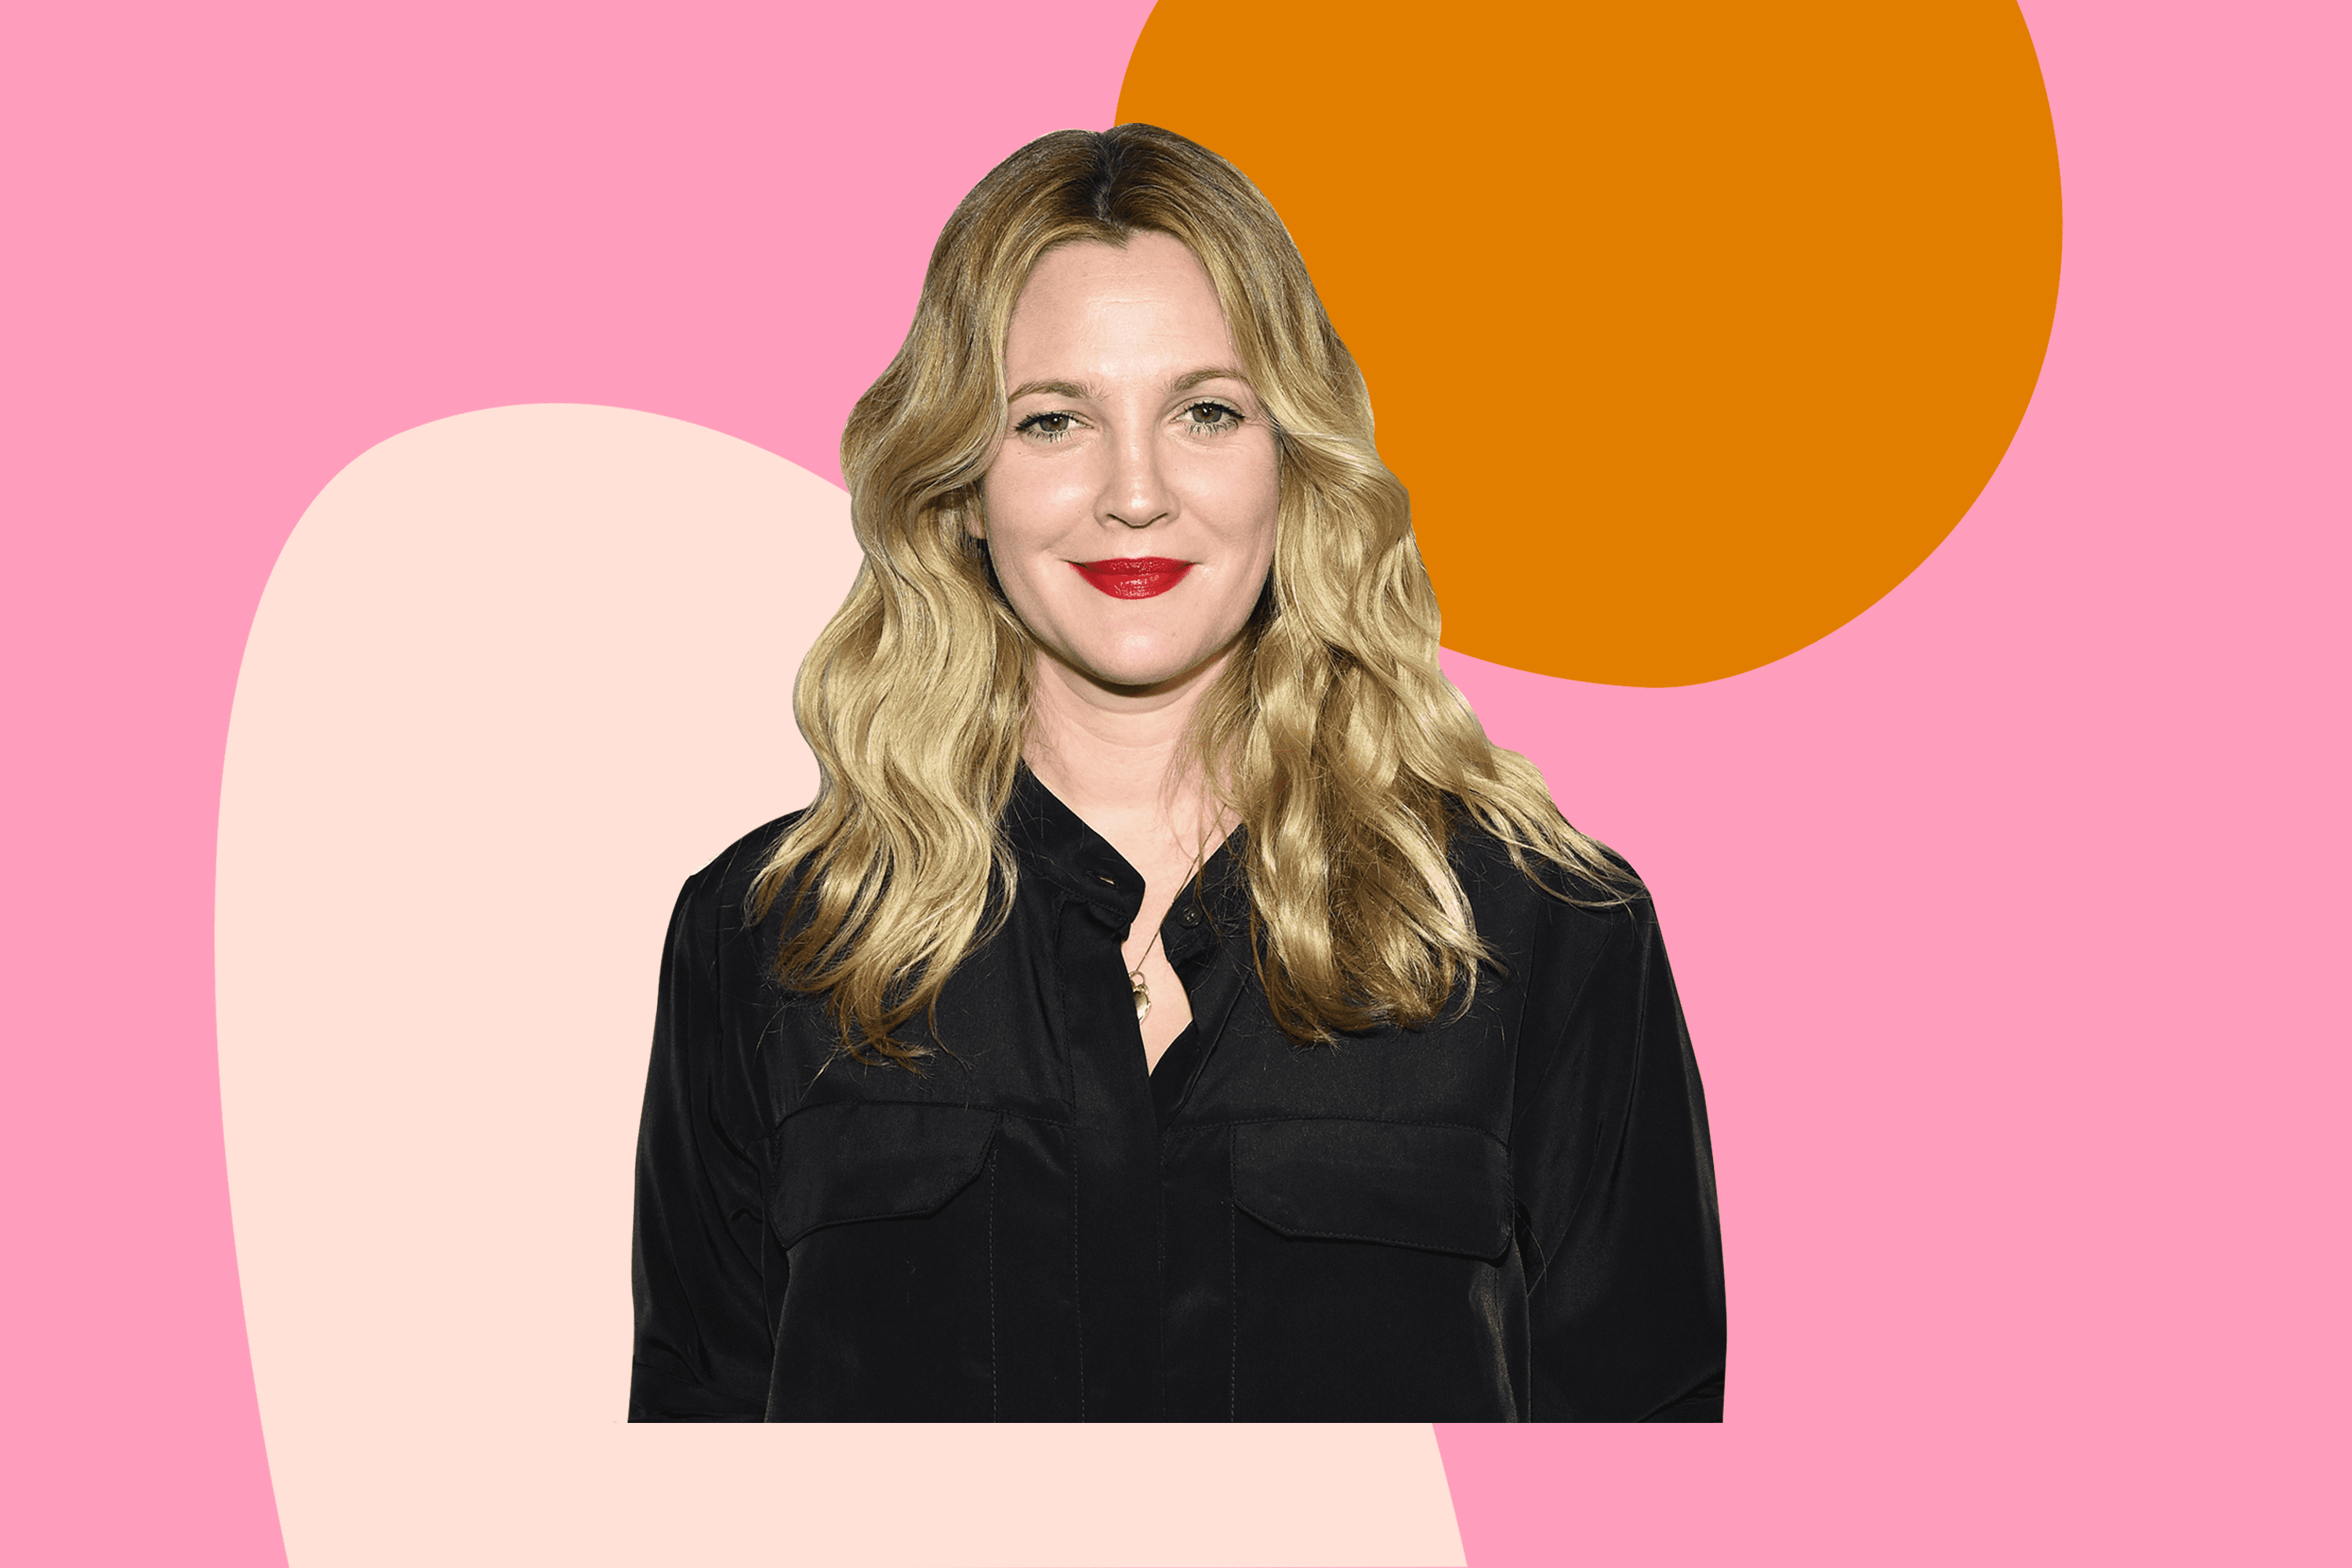 https://cdn.apartmenttherapy.info/image/upload/v1661885400/at/art/design/evergreen-graphics/headshot/Drew-barrymore-AT.png